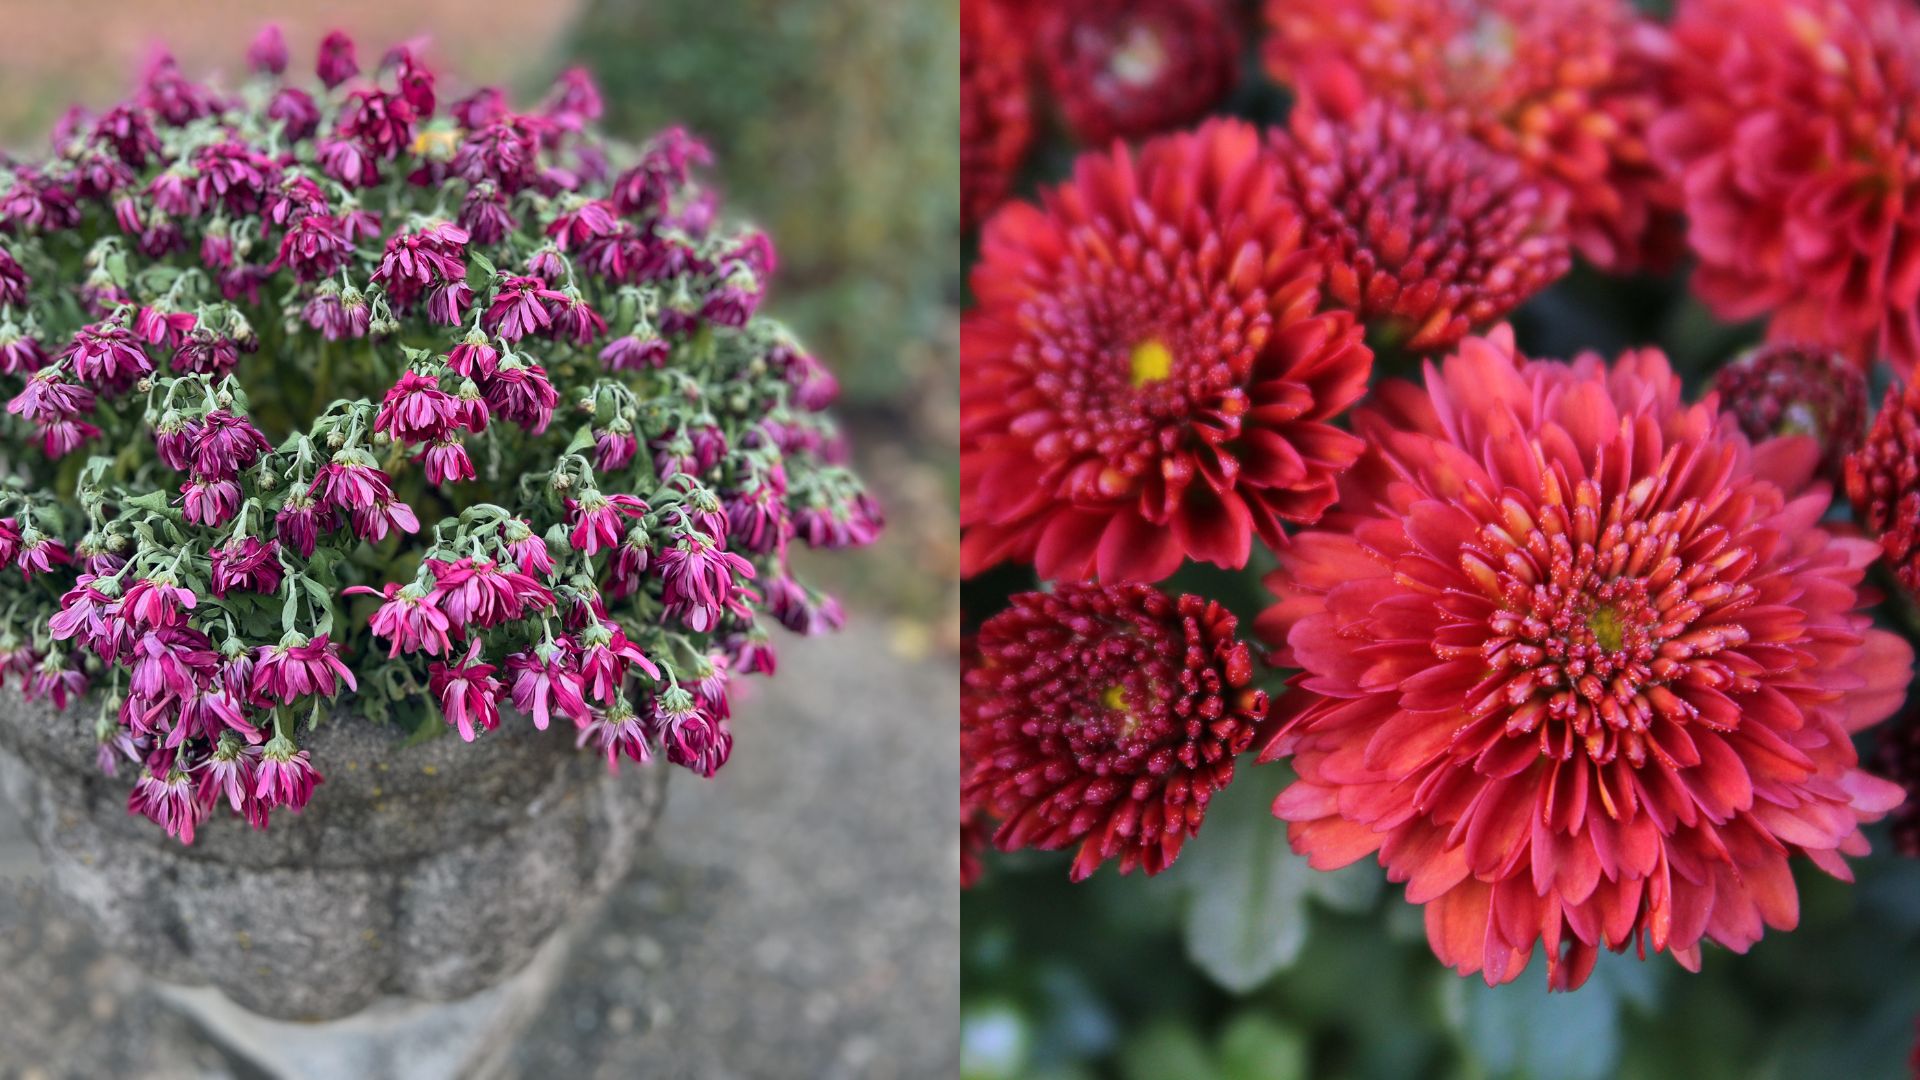 is it really possible to grow already-dead mums in your garden